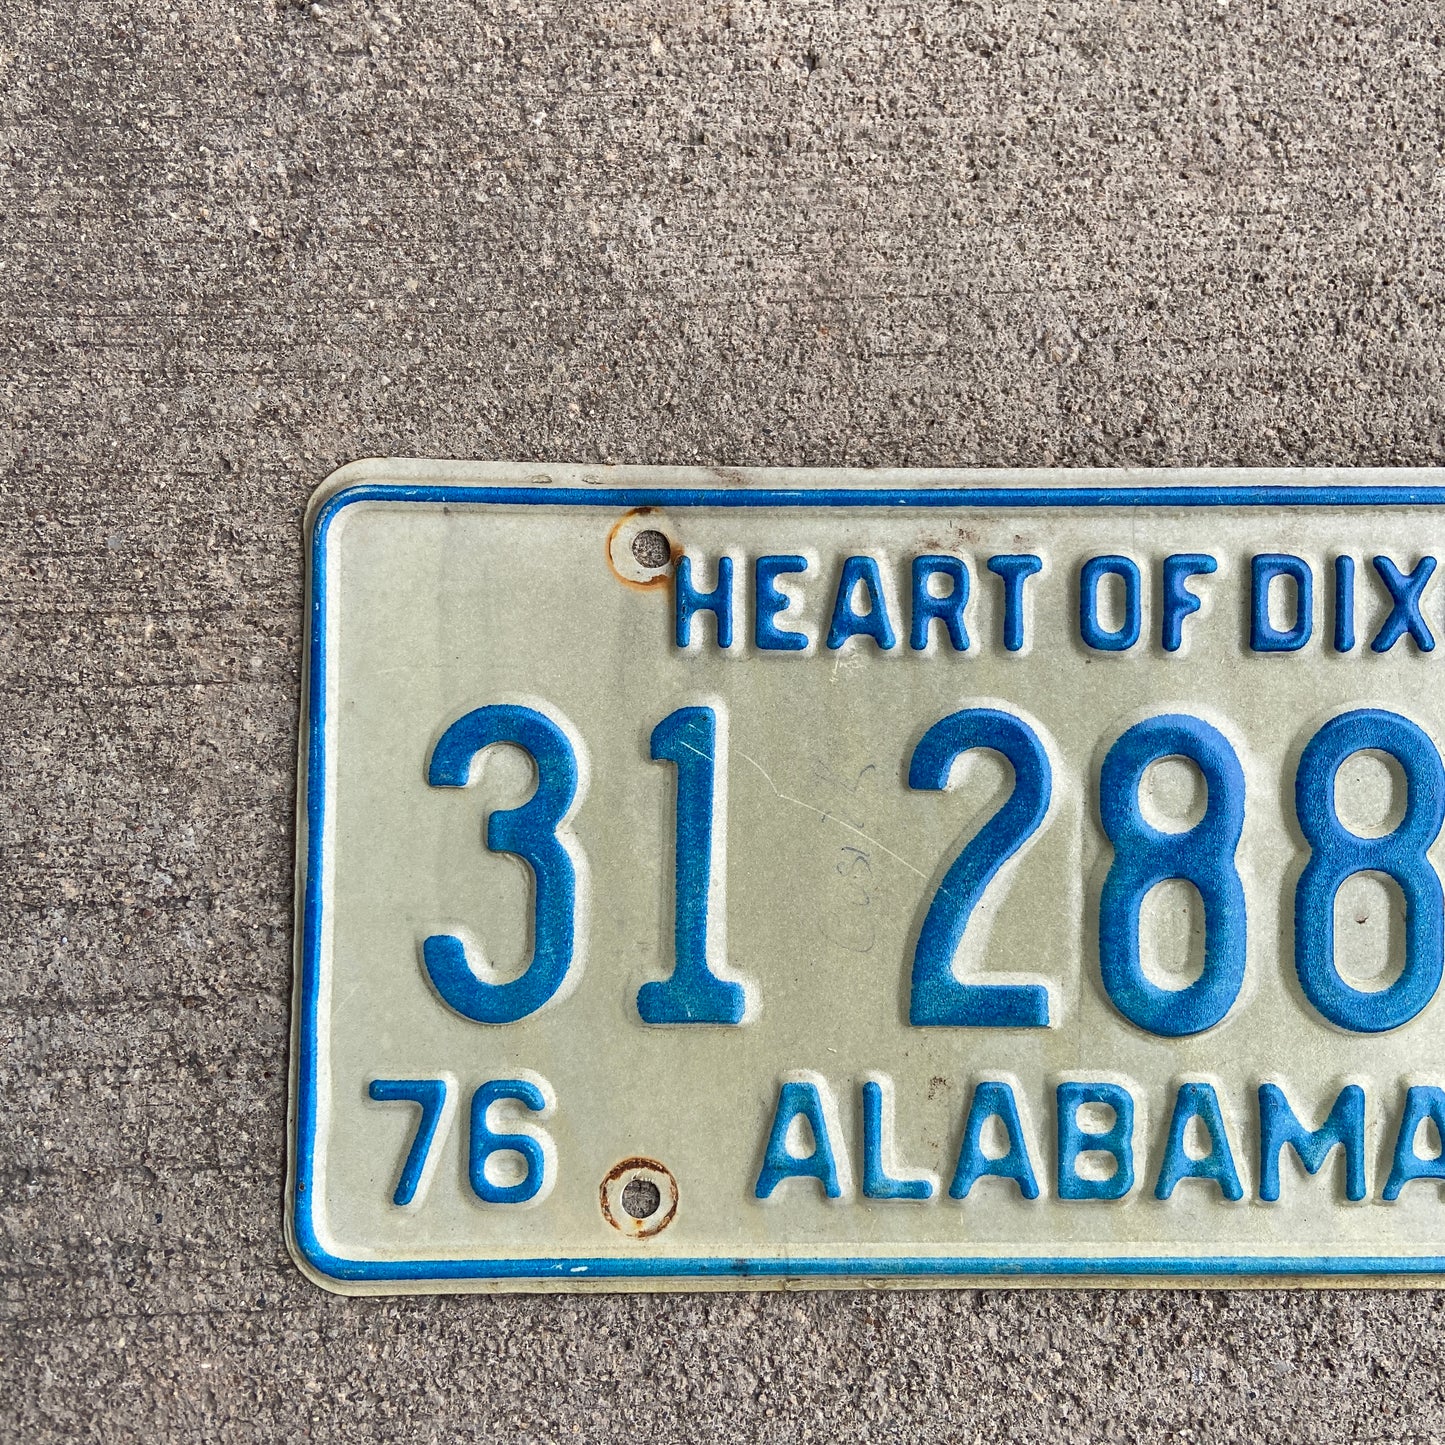 1976 Alabama License Plate Vintage White Heart of Dixie 31-28842